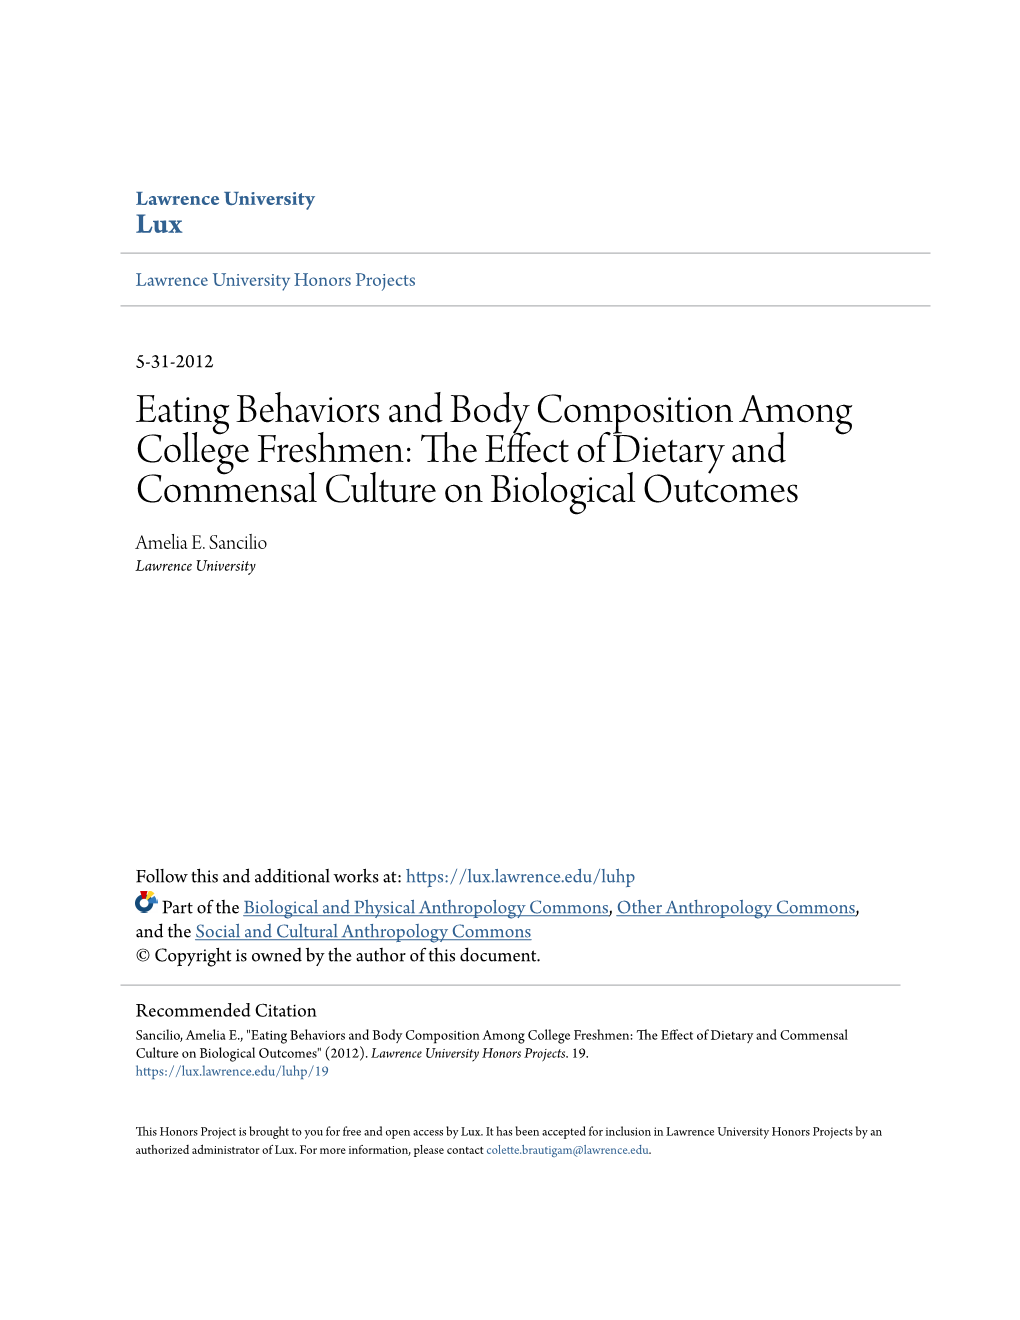 The Effect of Dietary and Commensal Culture on Biological Outcomes" (2012)